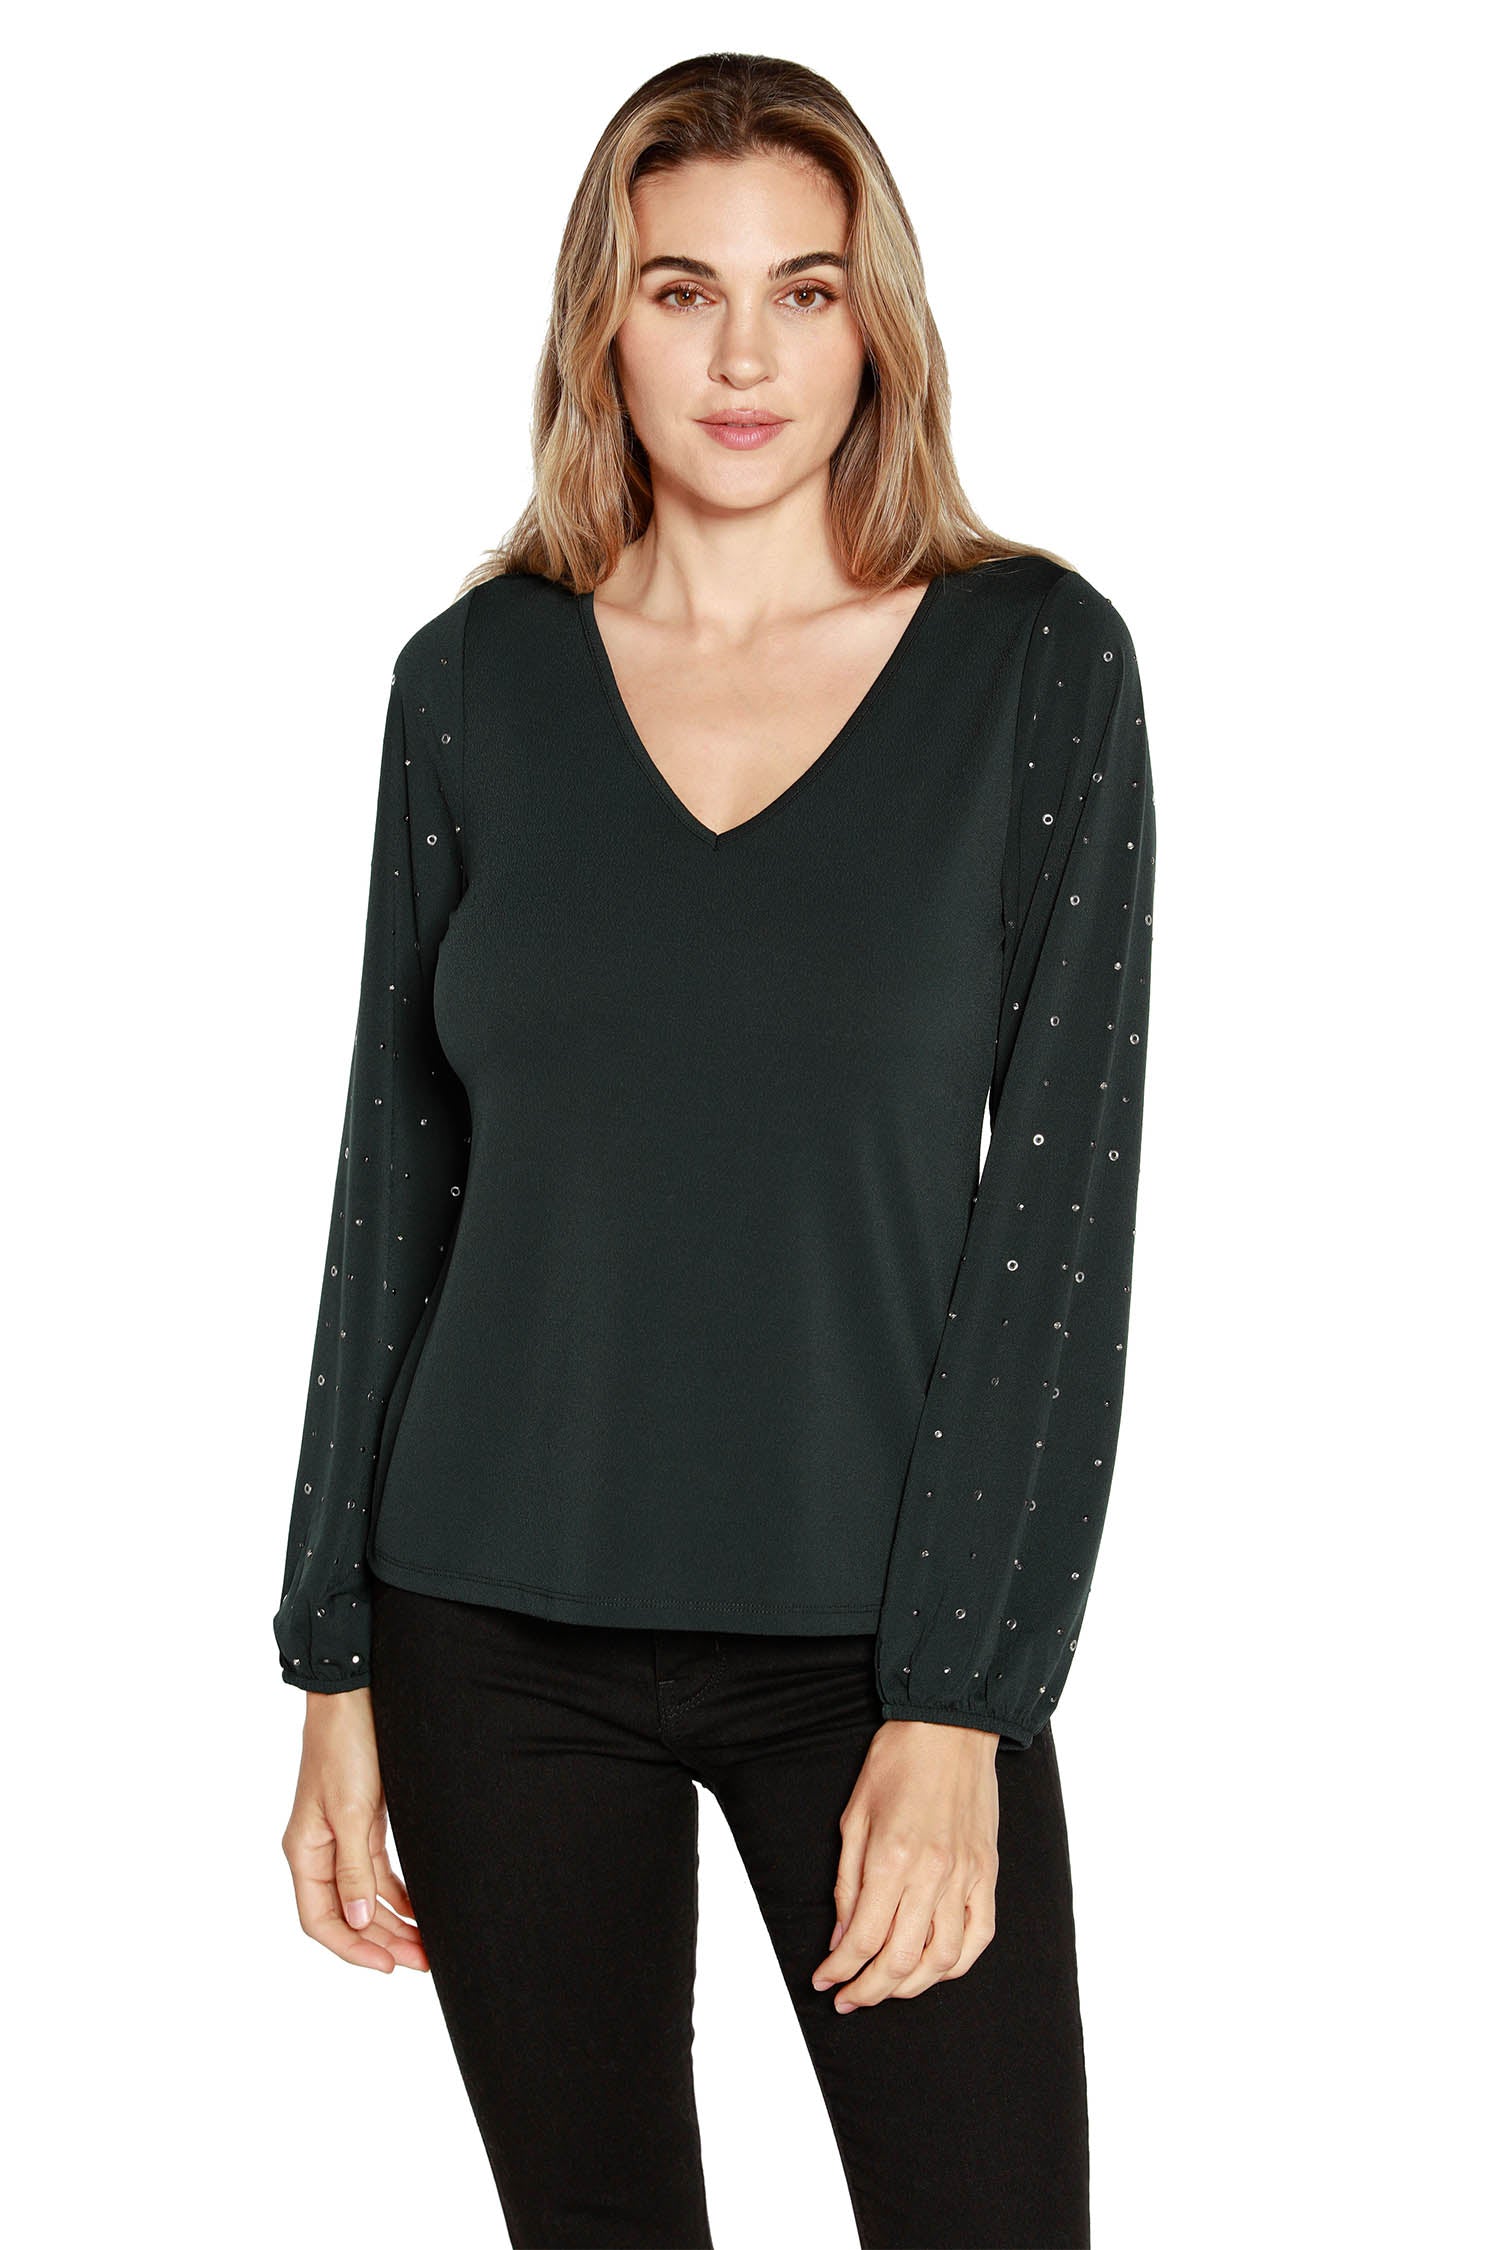 Women's V-neck Knit Blouse with Rhinestones and Grommet Statement Sleeves